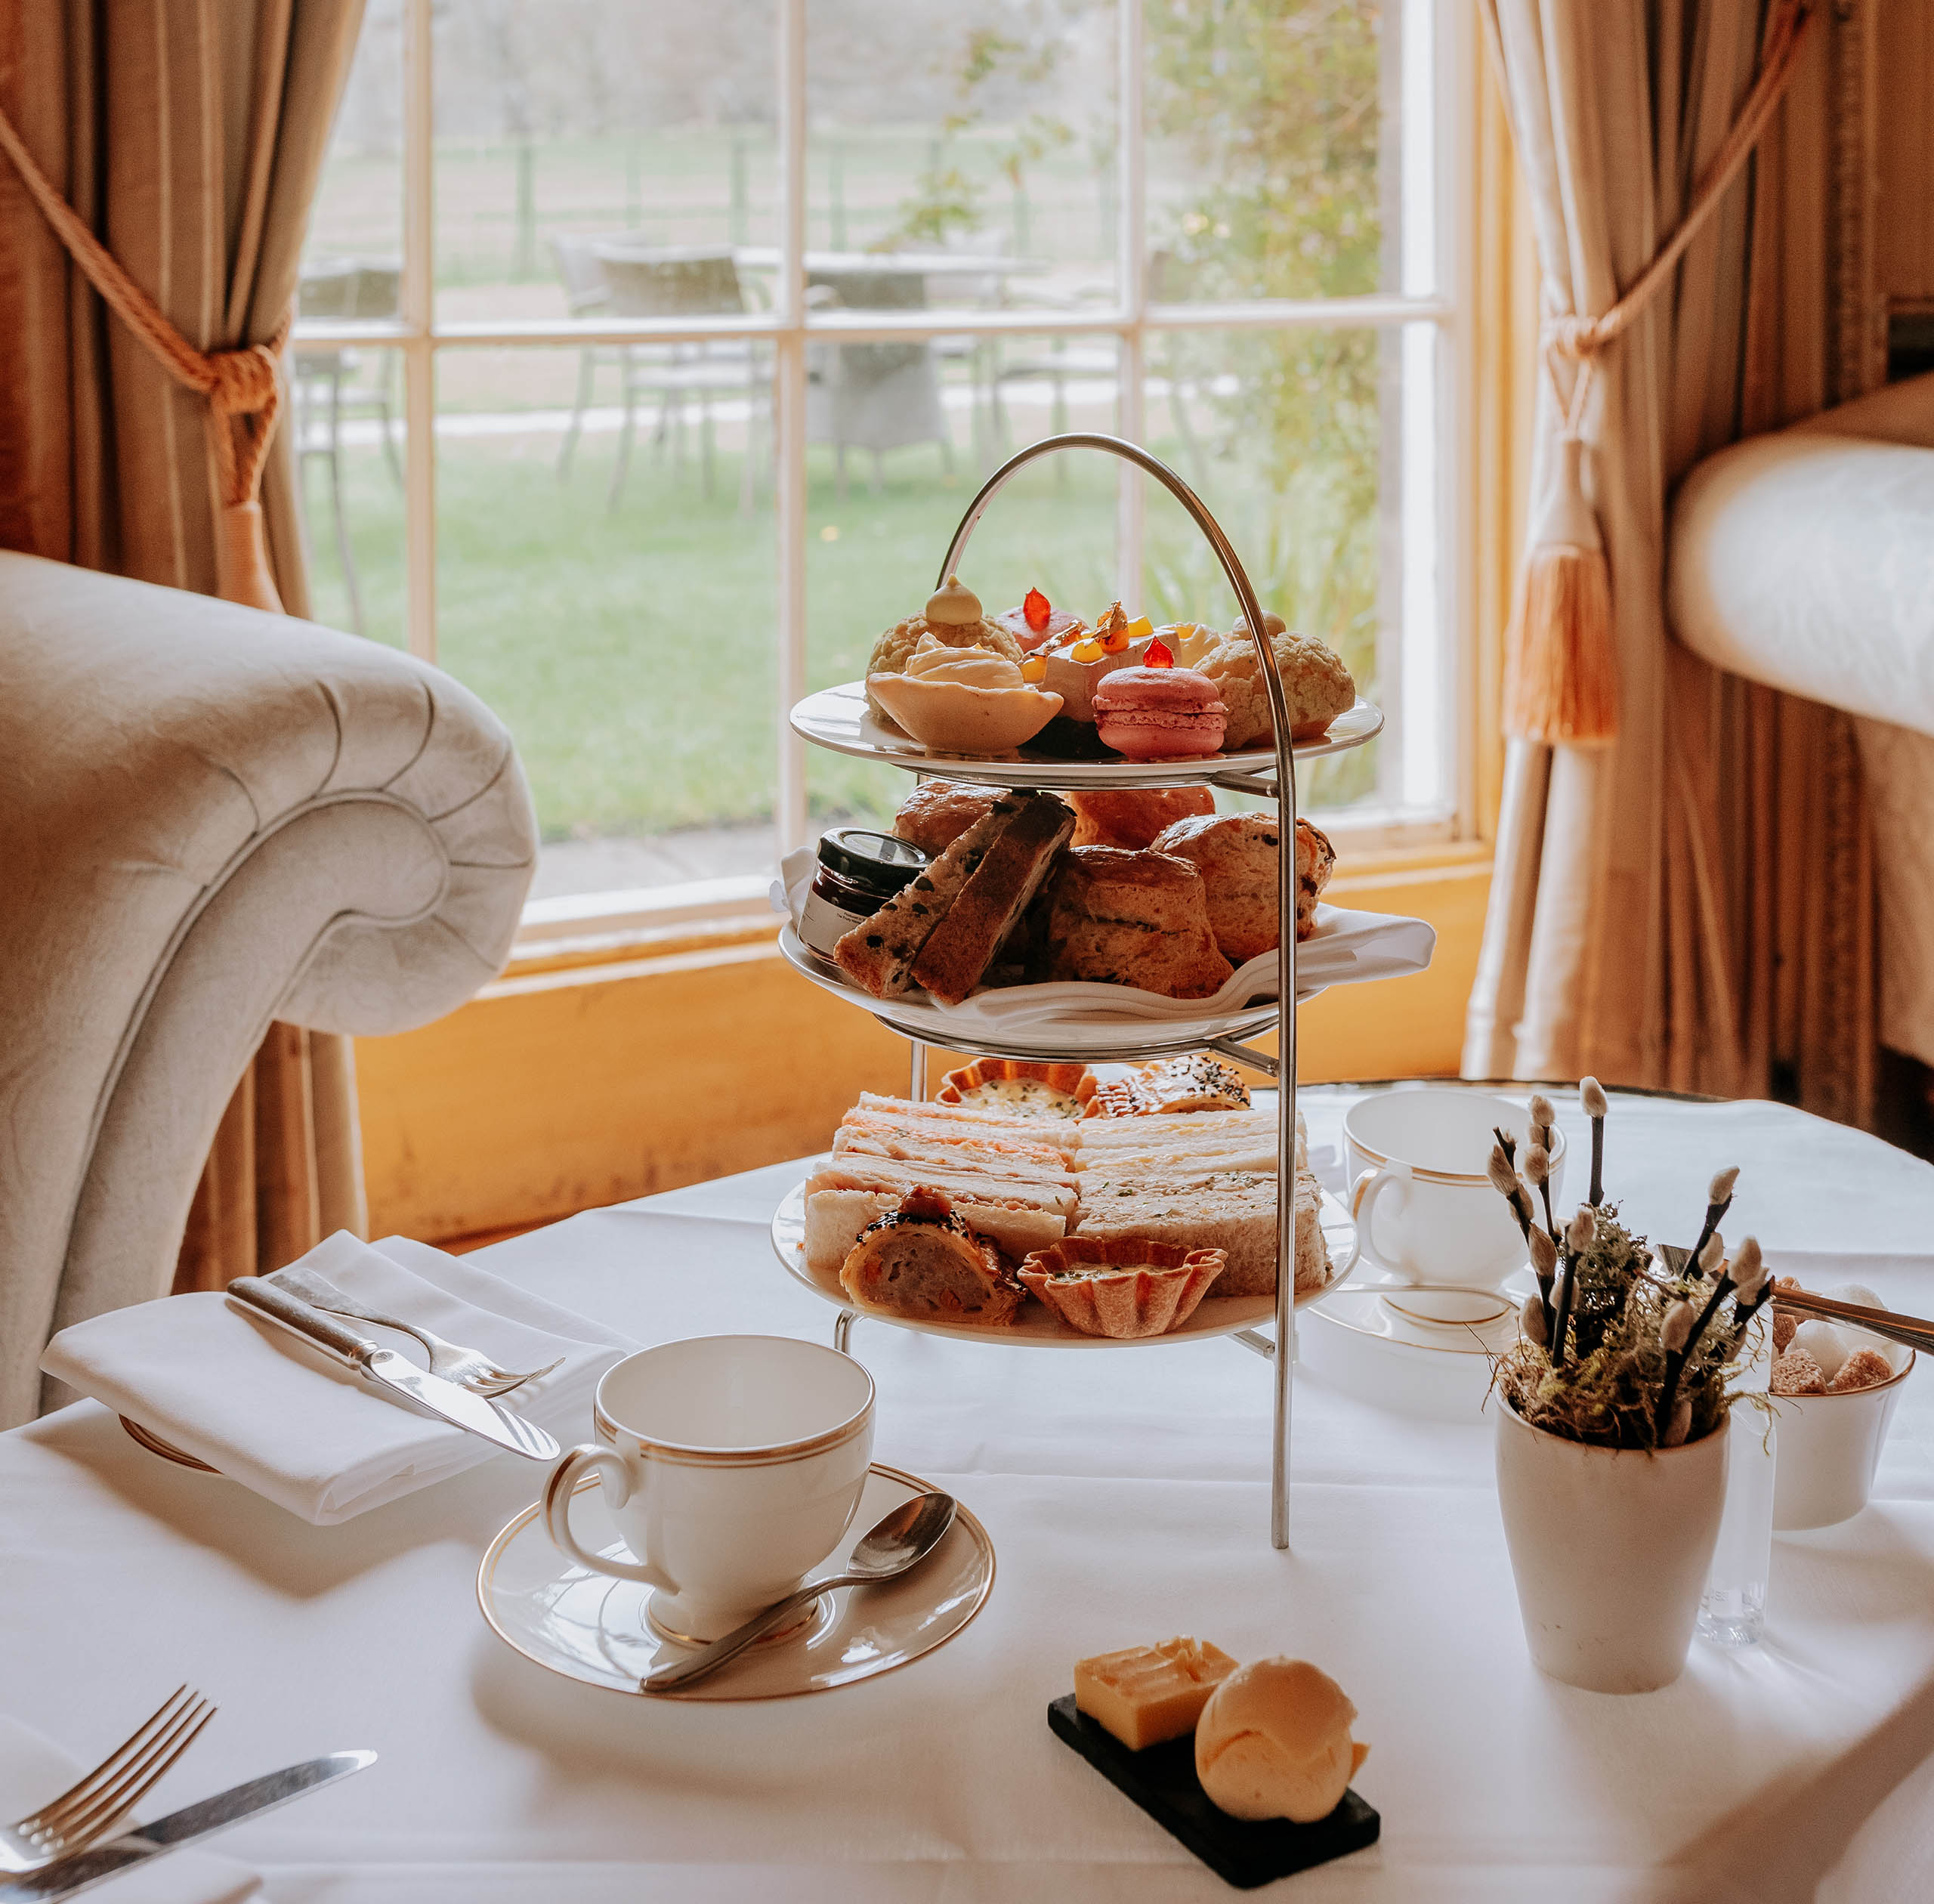 Afternoon tea at Swinton Park Hotel on the Swinton Estate in North Yorkshire